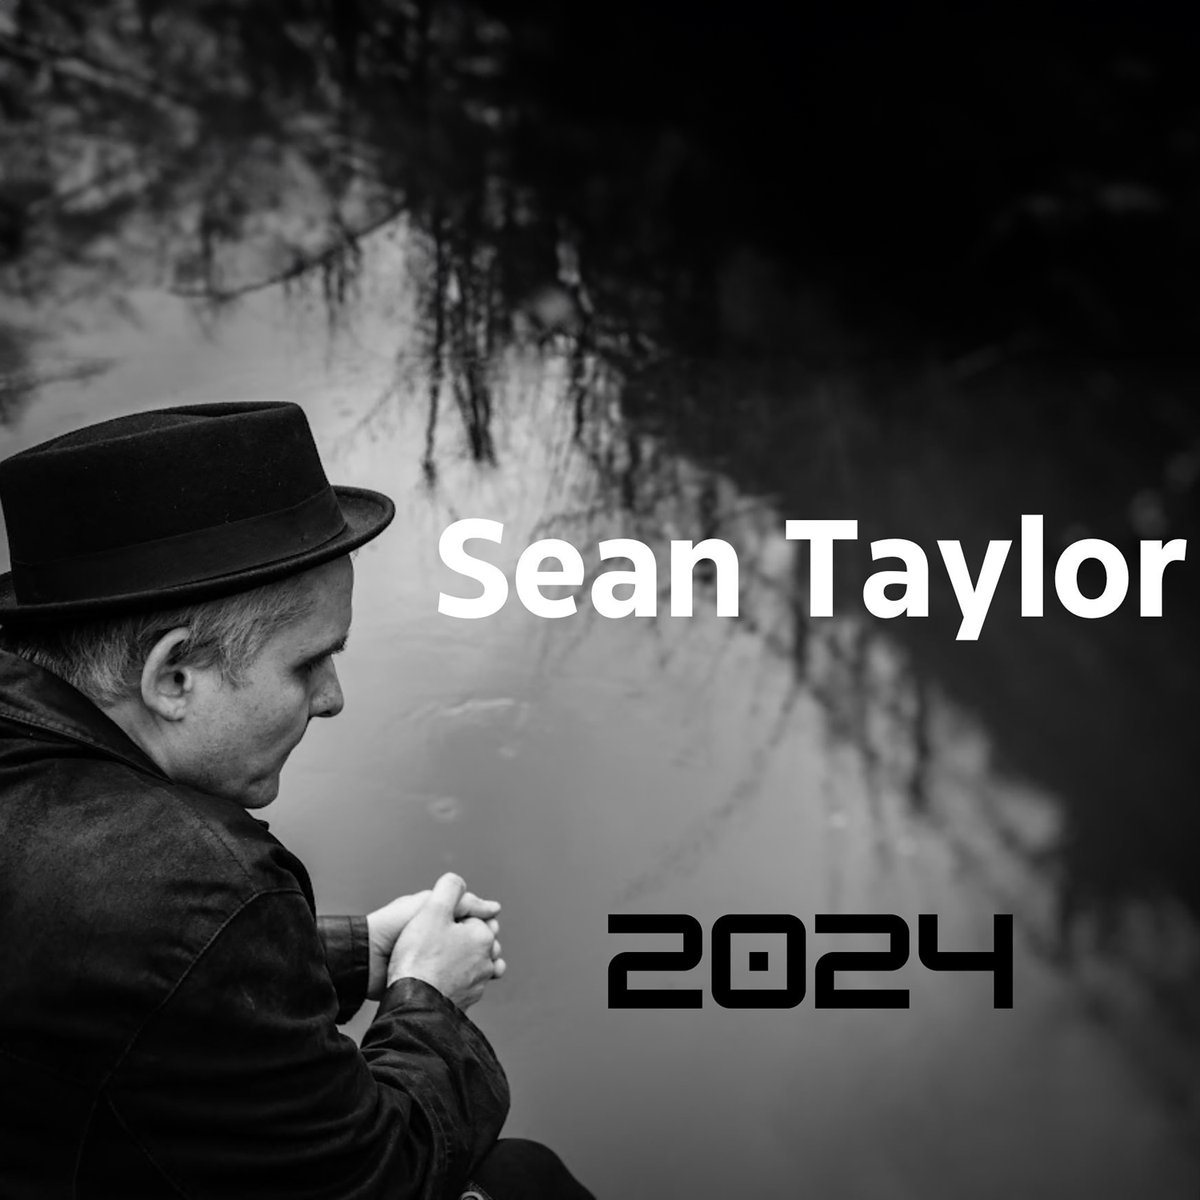 My new single #2024 is released on the 24th May #newmusic #blues #americana #seantaylor #2024 Photo by @efsb Film by @ReelNewsLondon With @Evansabovepr @contrecservices